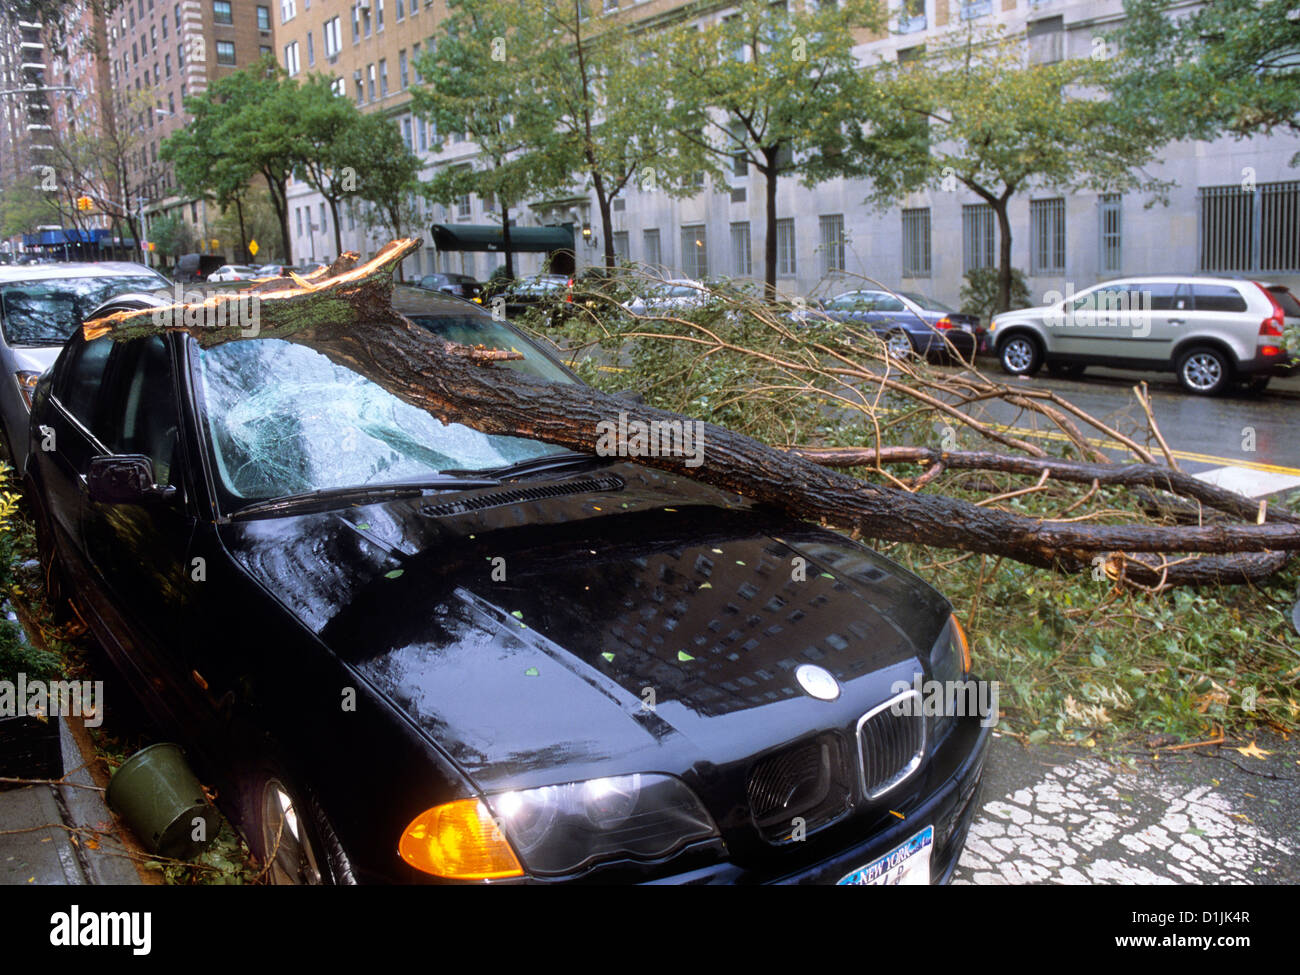 Storm damage and destruction. Fallen tree on car on New York City street. Shattered windshield. Hurricanes and climate change. USA Stock Photo